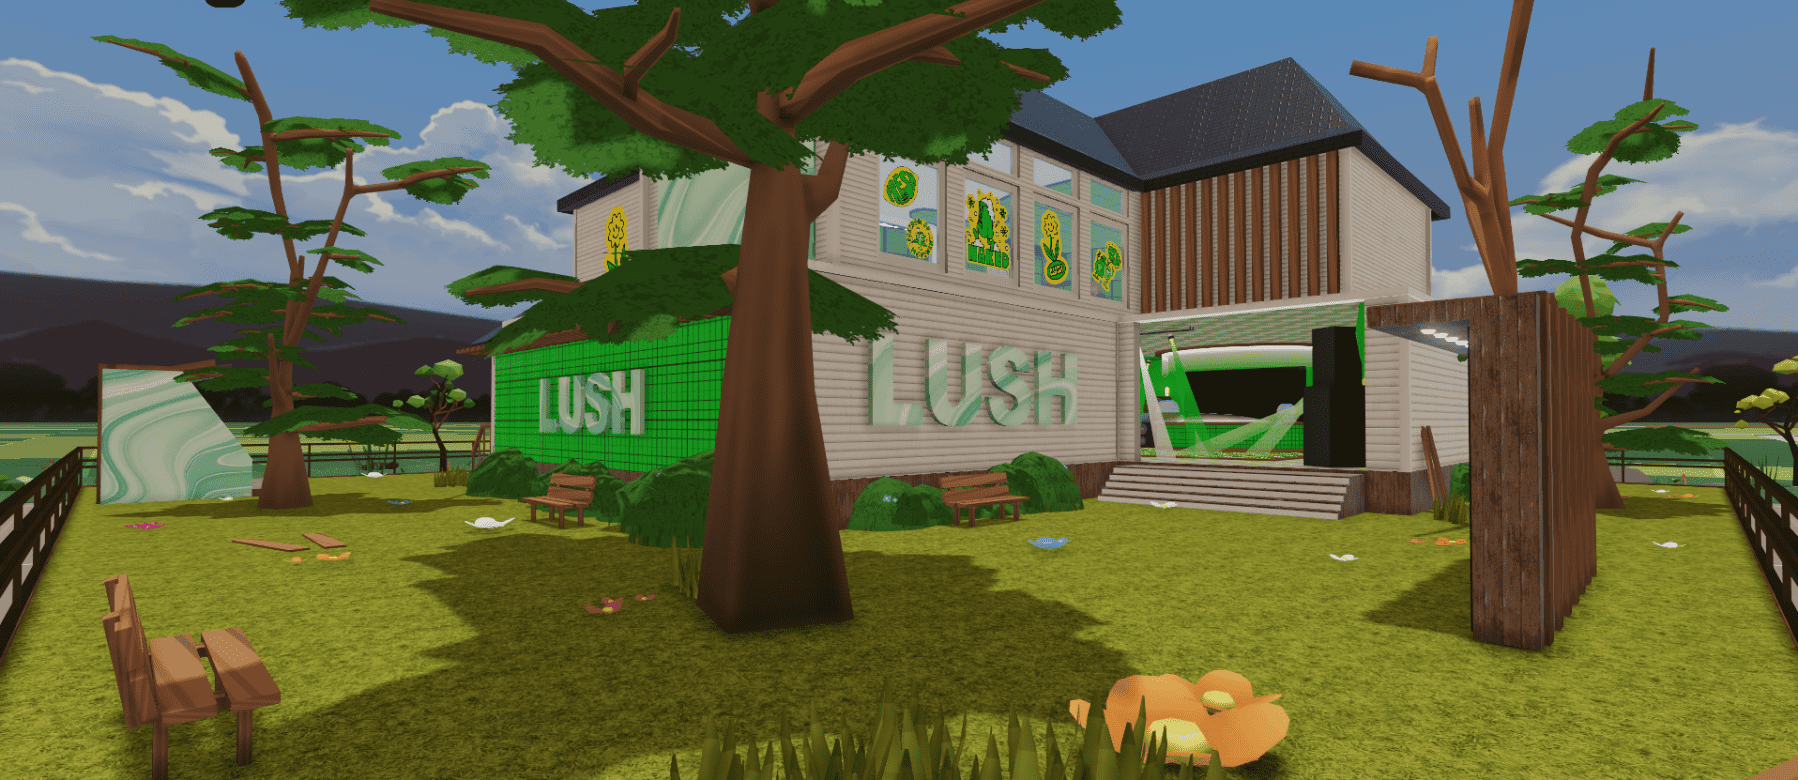 First venture into the Metaverse as Lush debuts a Lush House in